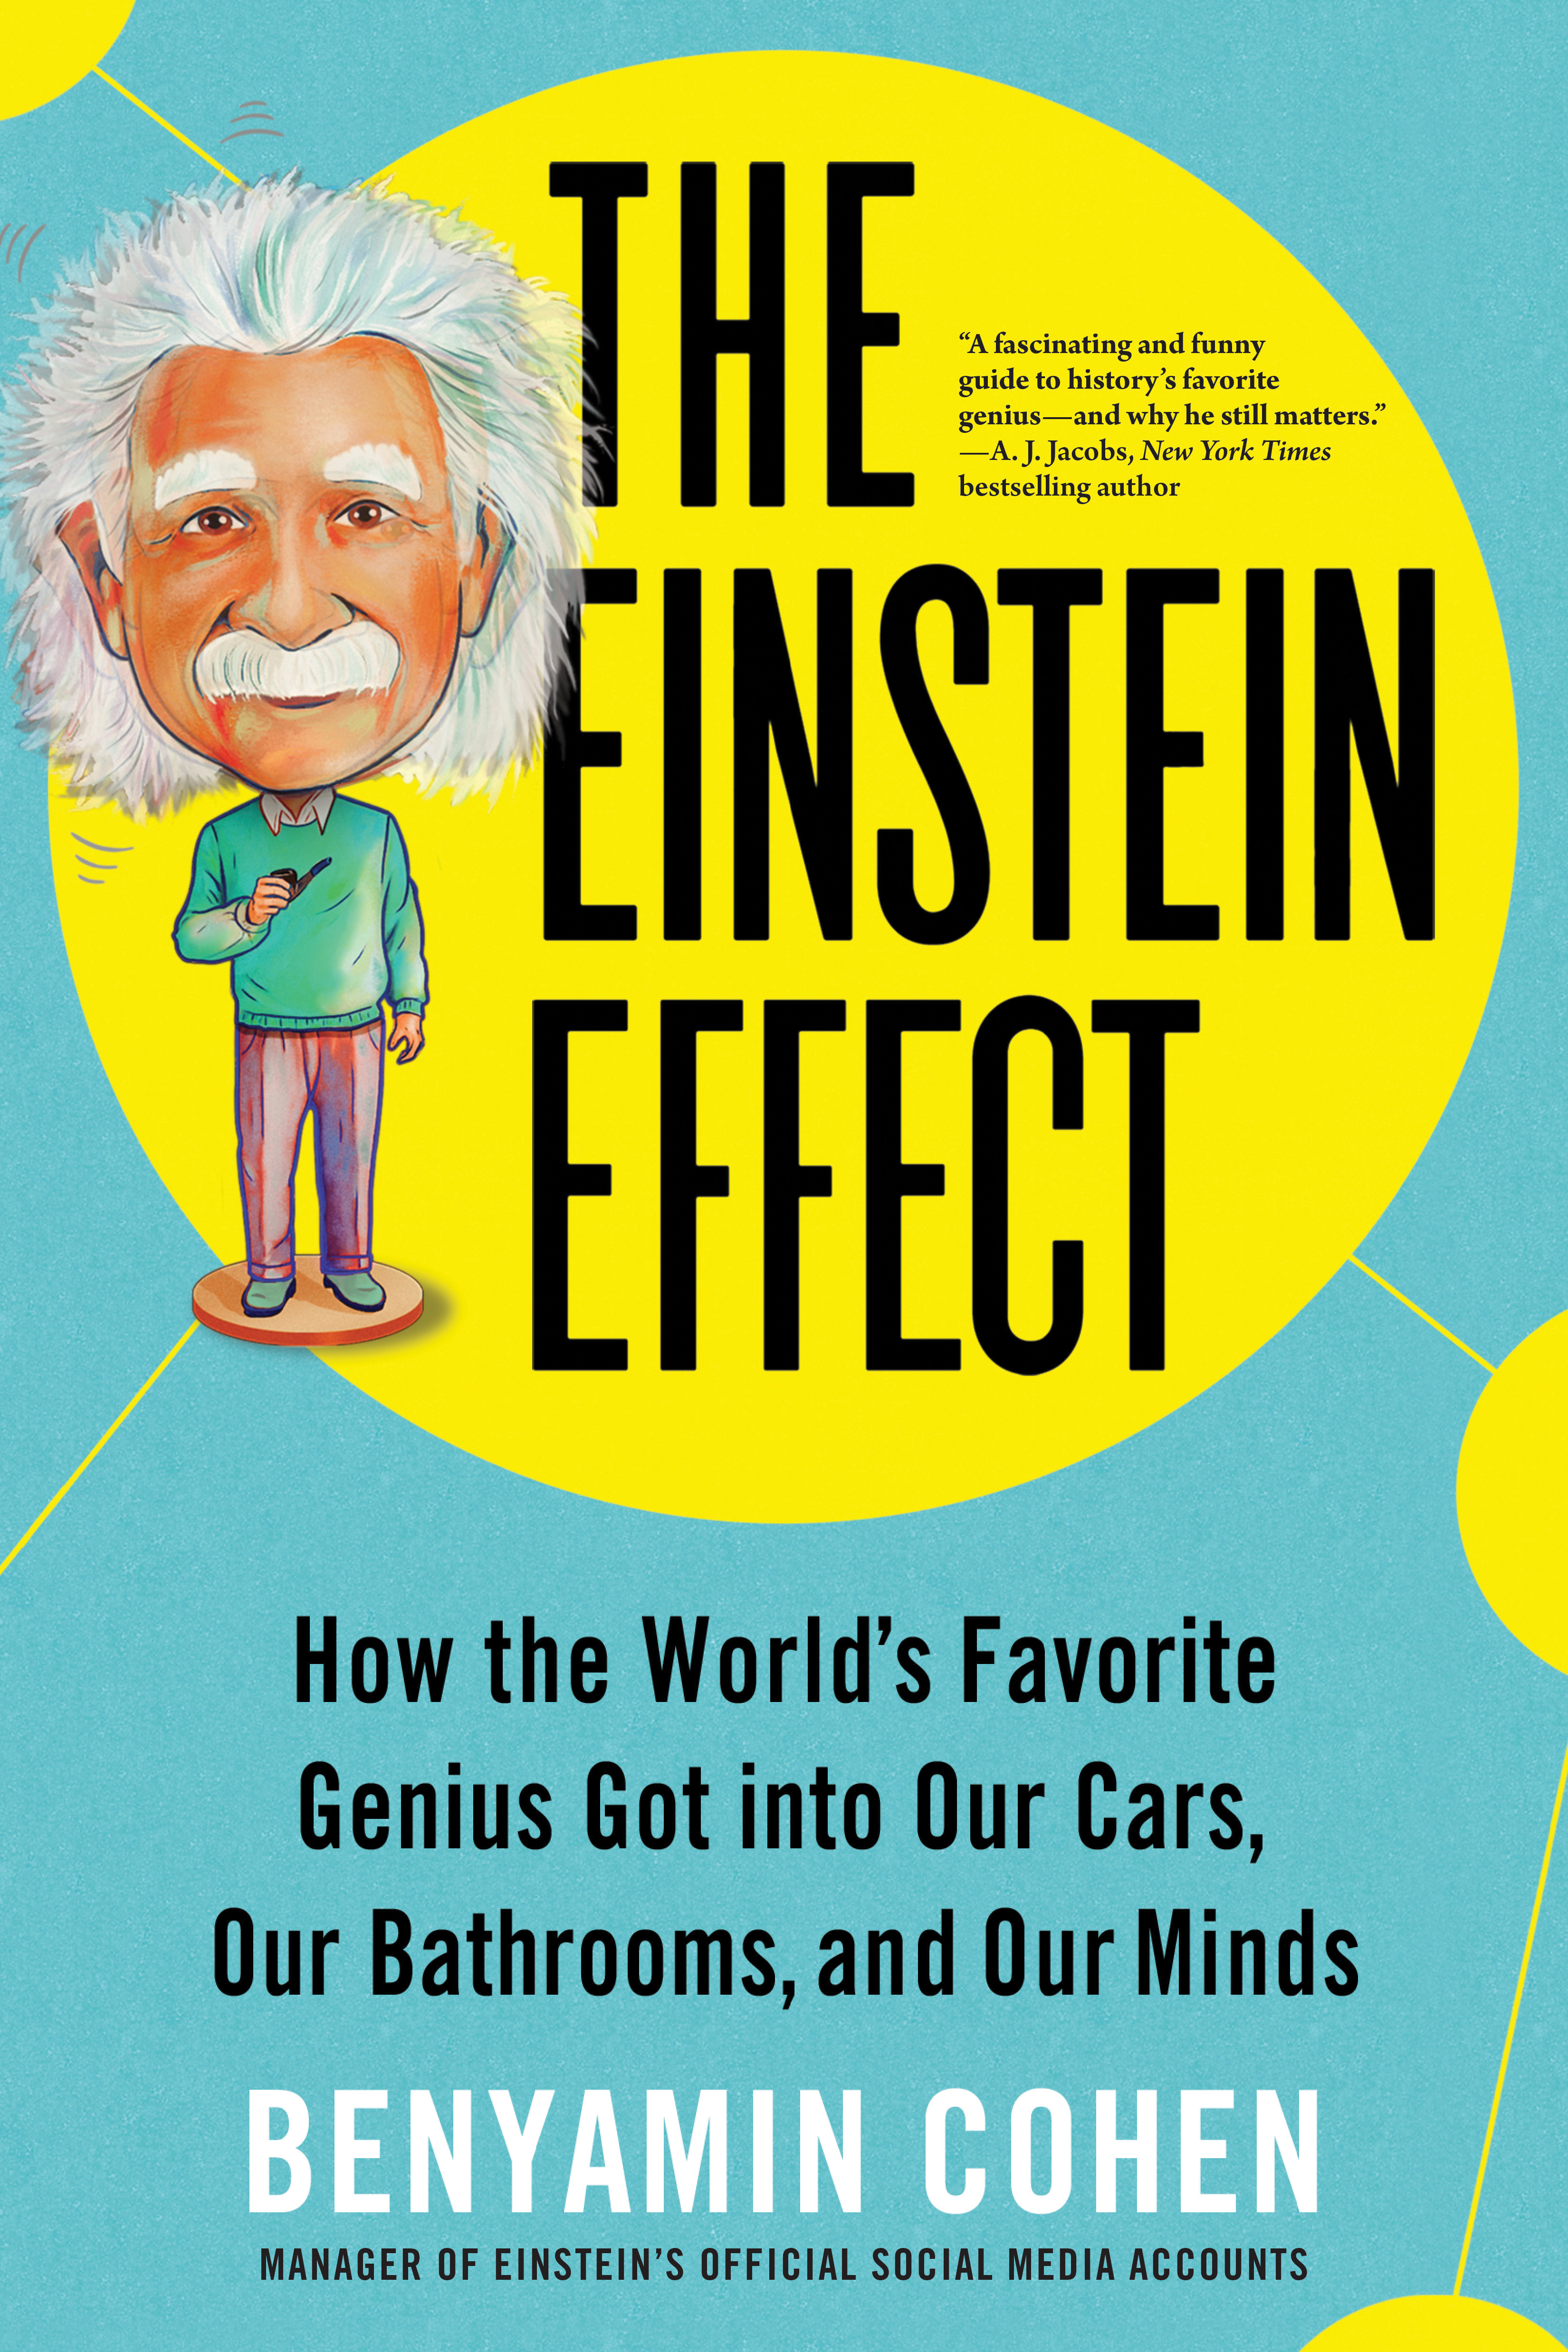 Imagen de portada para The Einstein Effect [electronic resource] : How the World's Favorite Genius Got into Our Cars, Our Bathrooms, and Our Minds